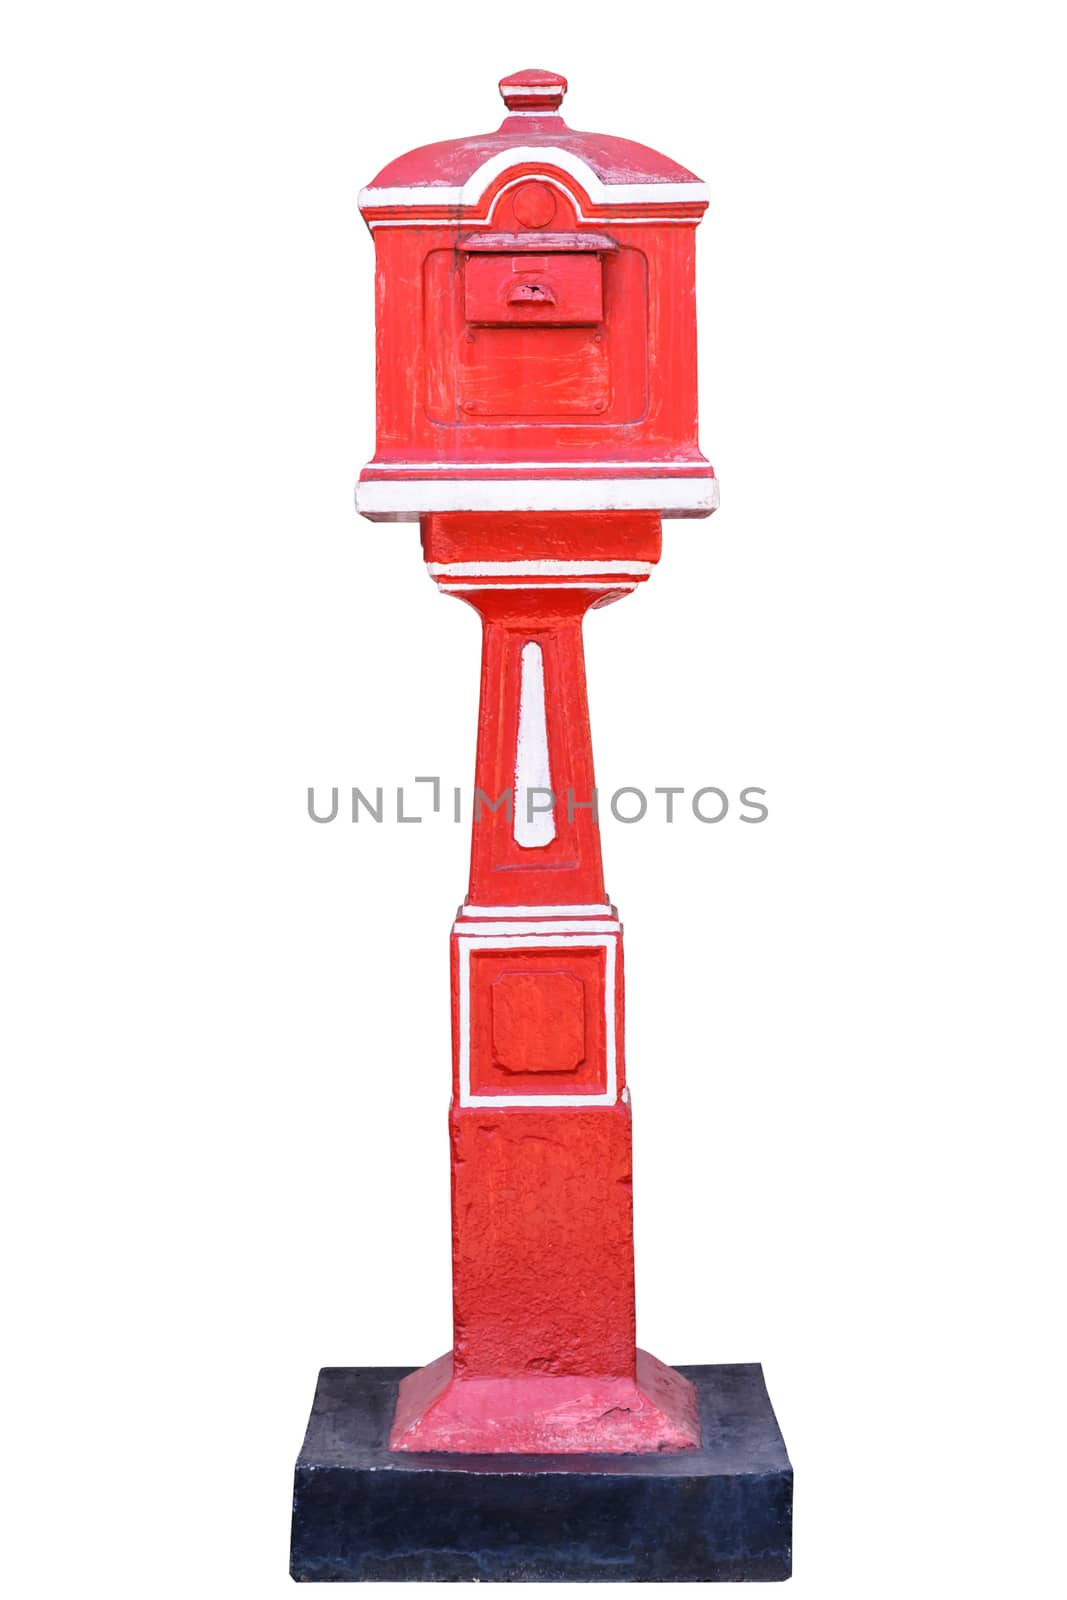 Red old-fashioned mailbox isolated on white background with clipping path